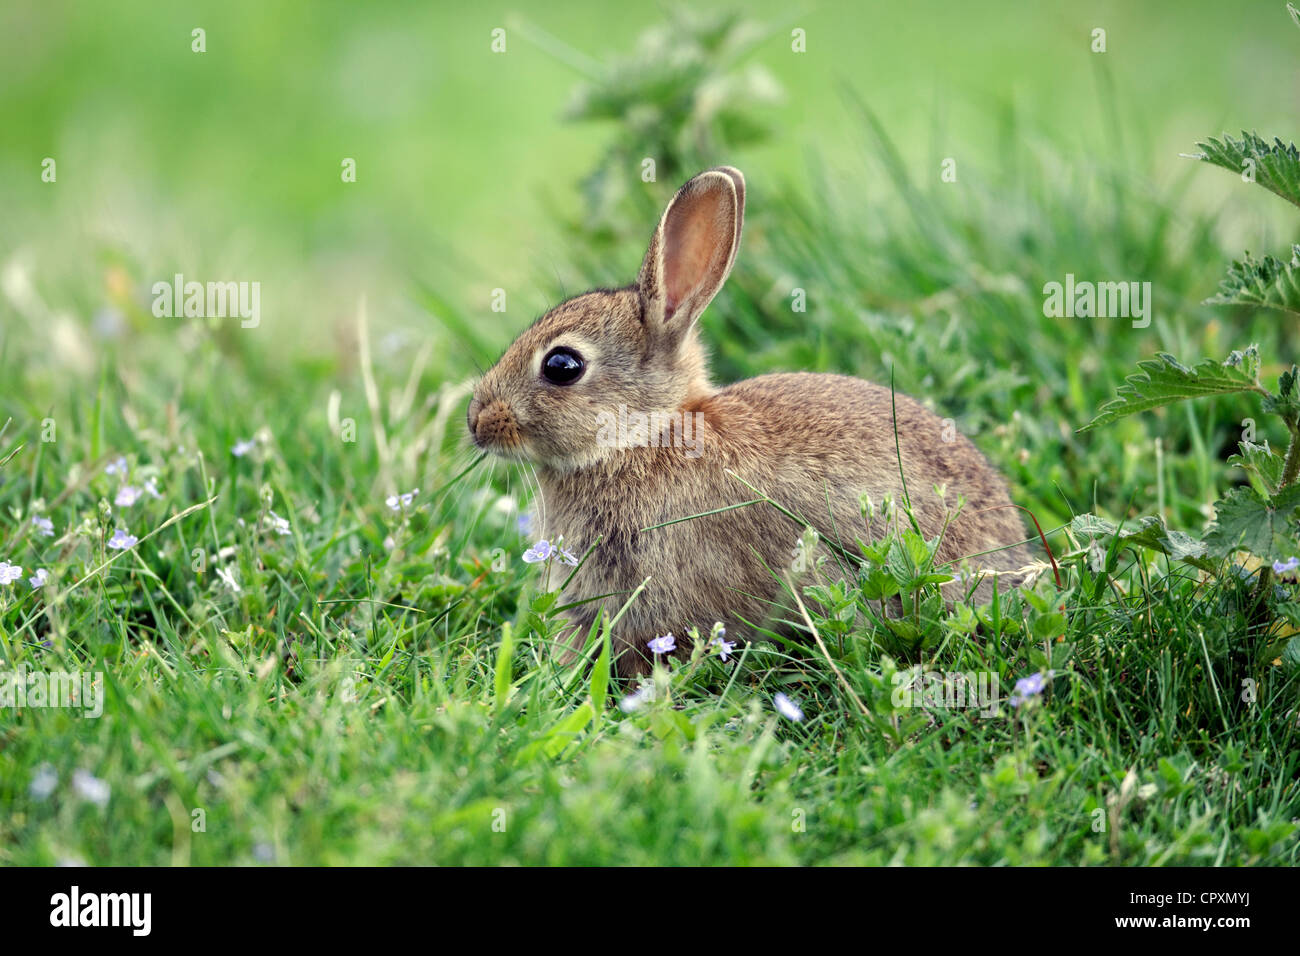 Rabbit, Oryctolagus cuniculus, single young mammal in grass, Warwickshire, May 2012 Stock Photo